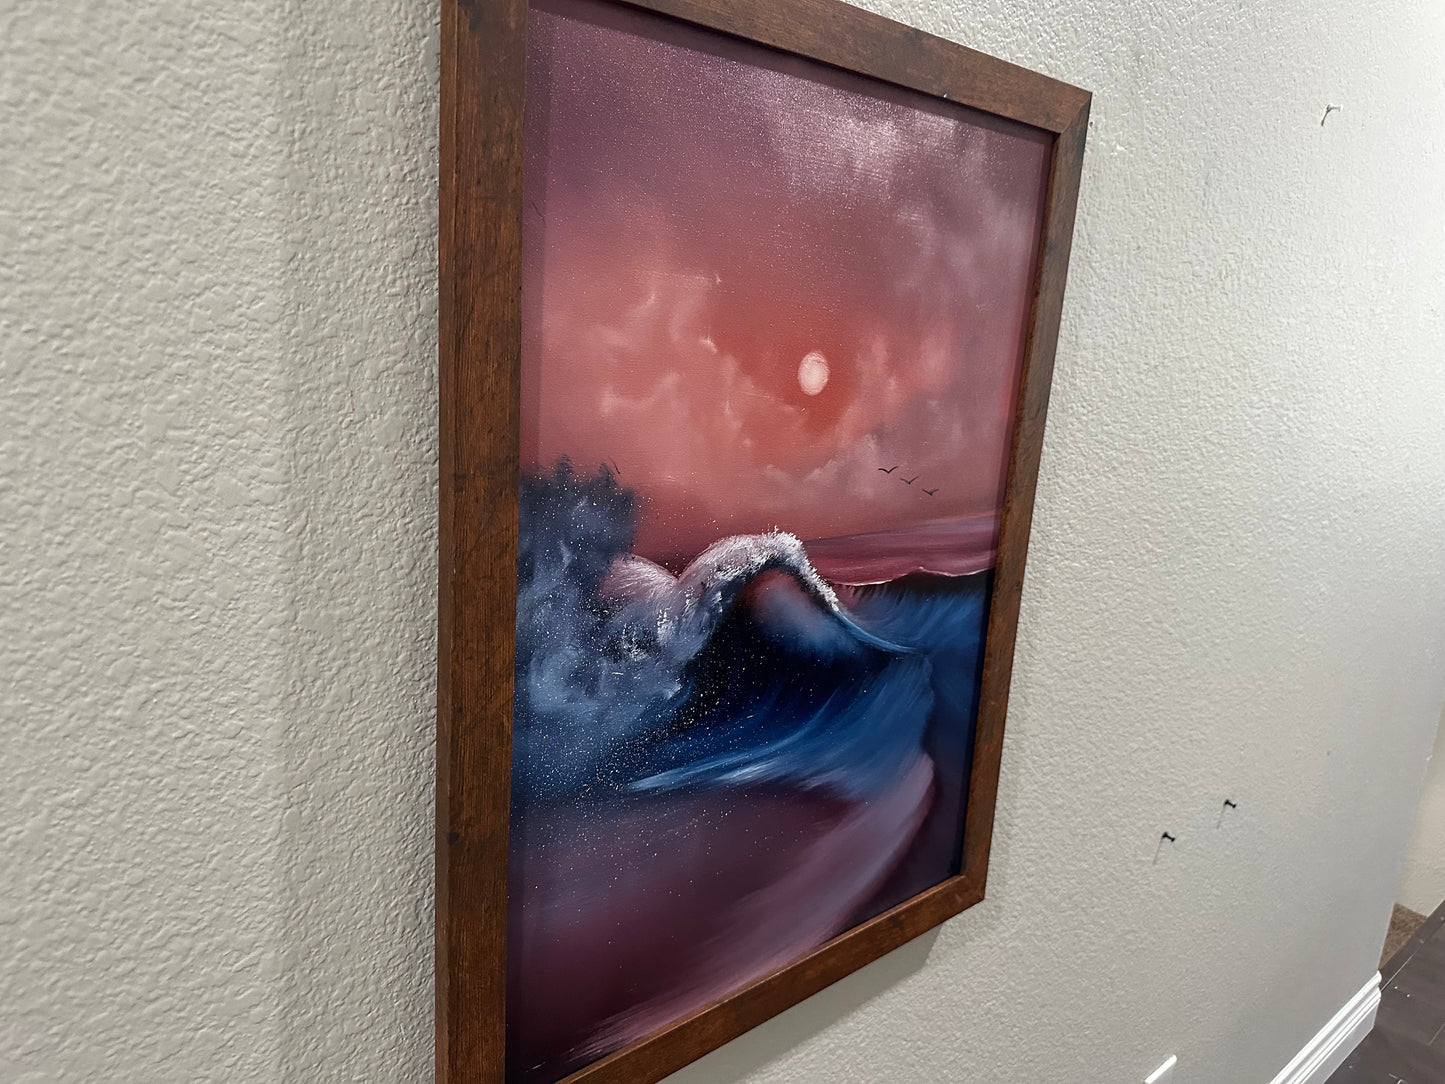 Painting 873 - 18x24" Canvas - Sunset Seascape with Crashing Waves painted Live on TikTok on 7/22/23 by PaintWithJosh